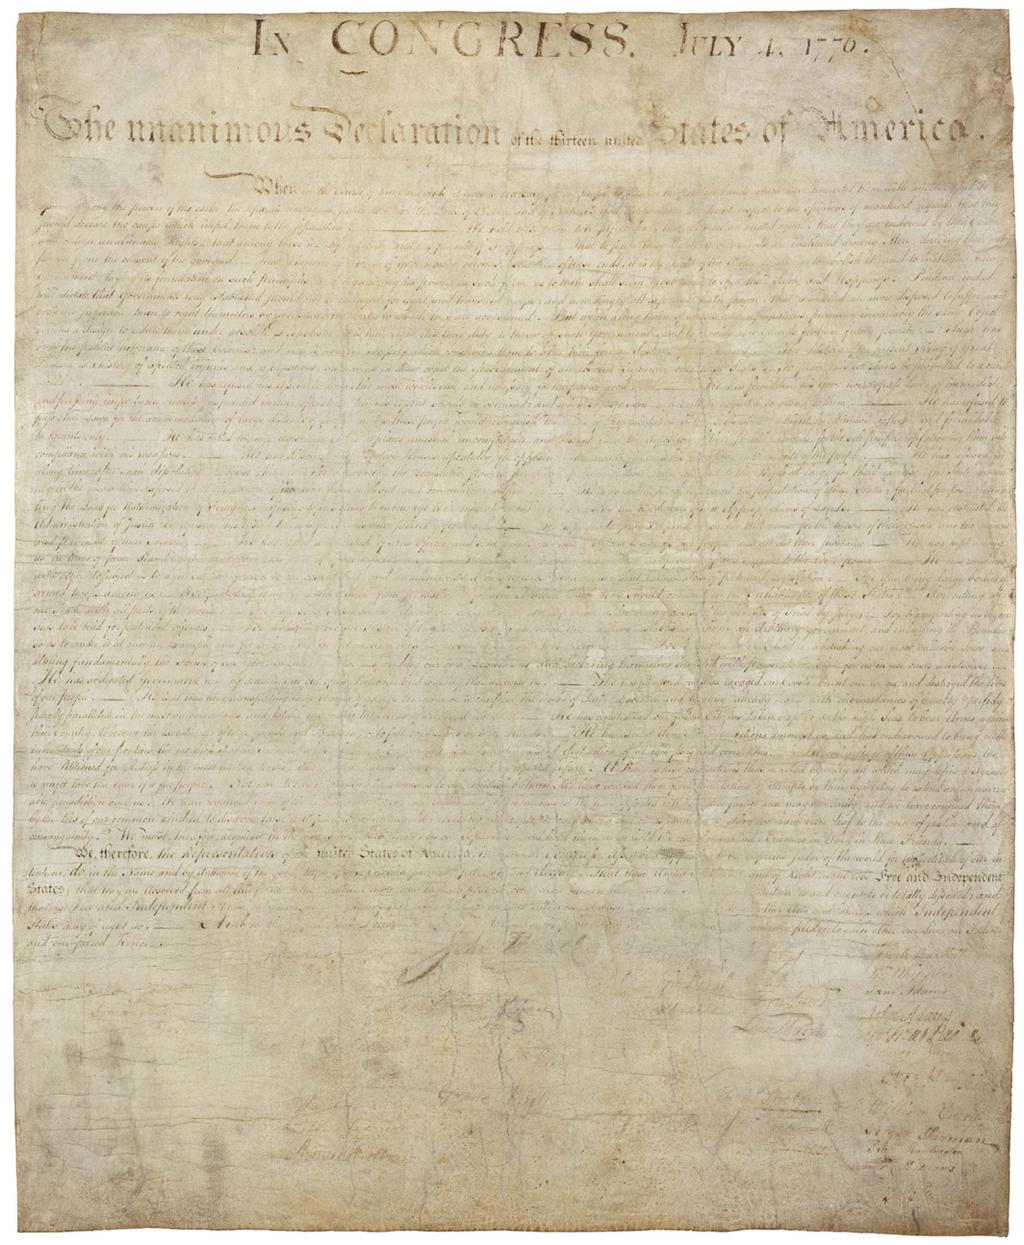 Declaration of Independence National Archives,